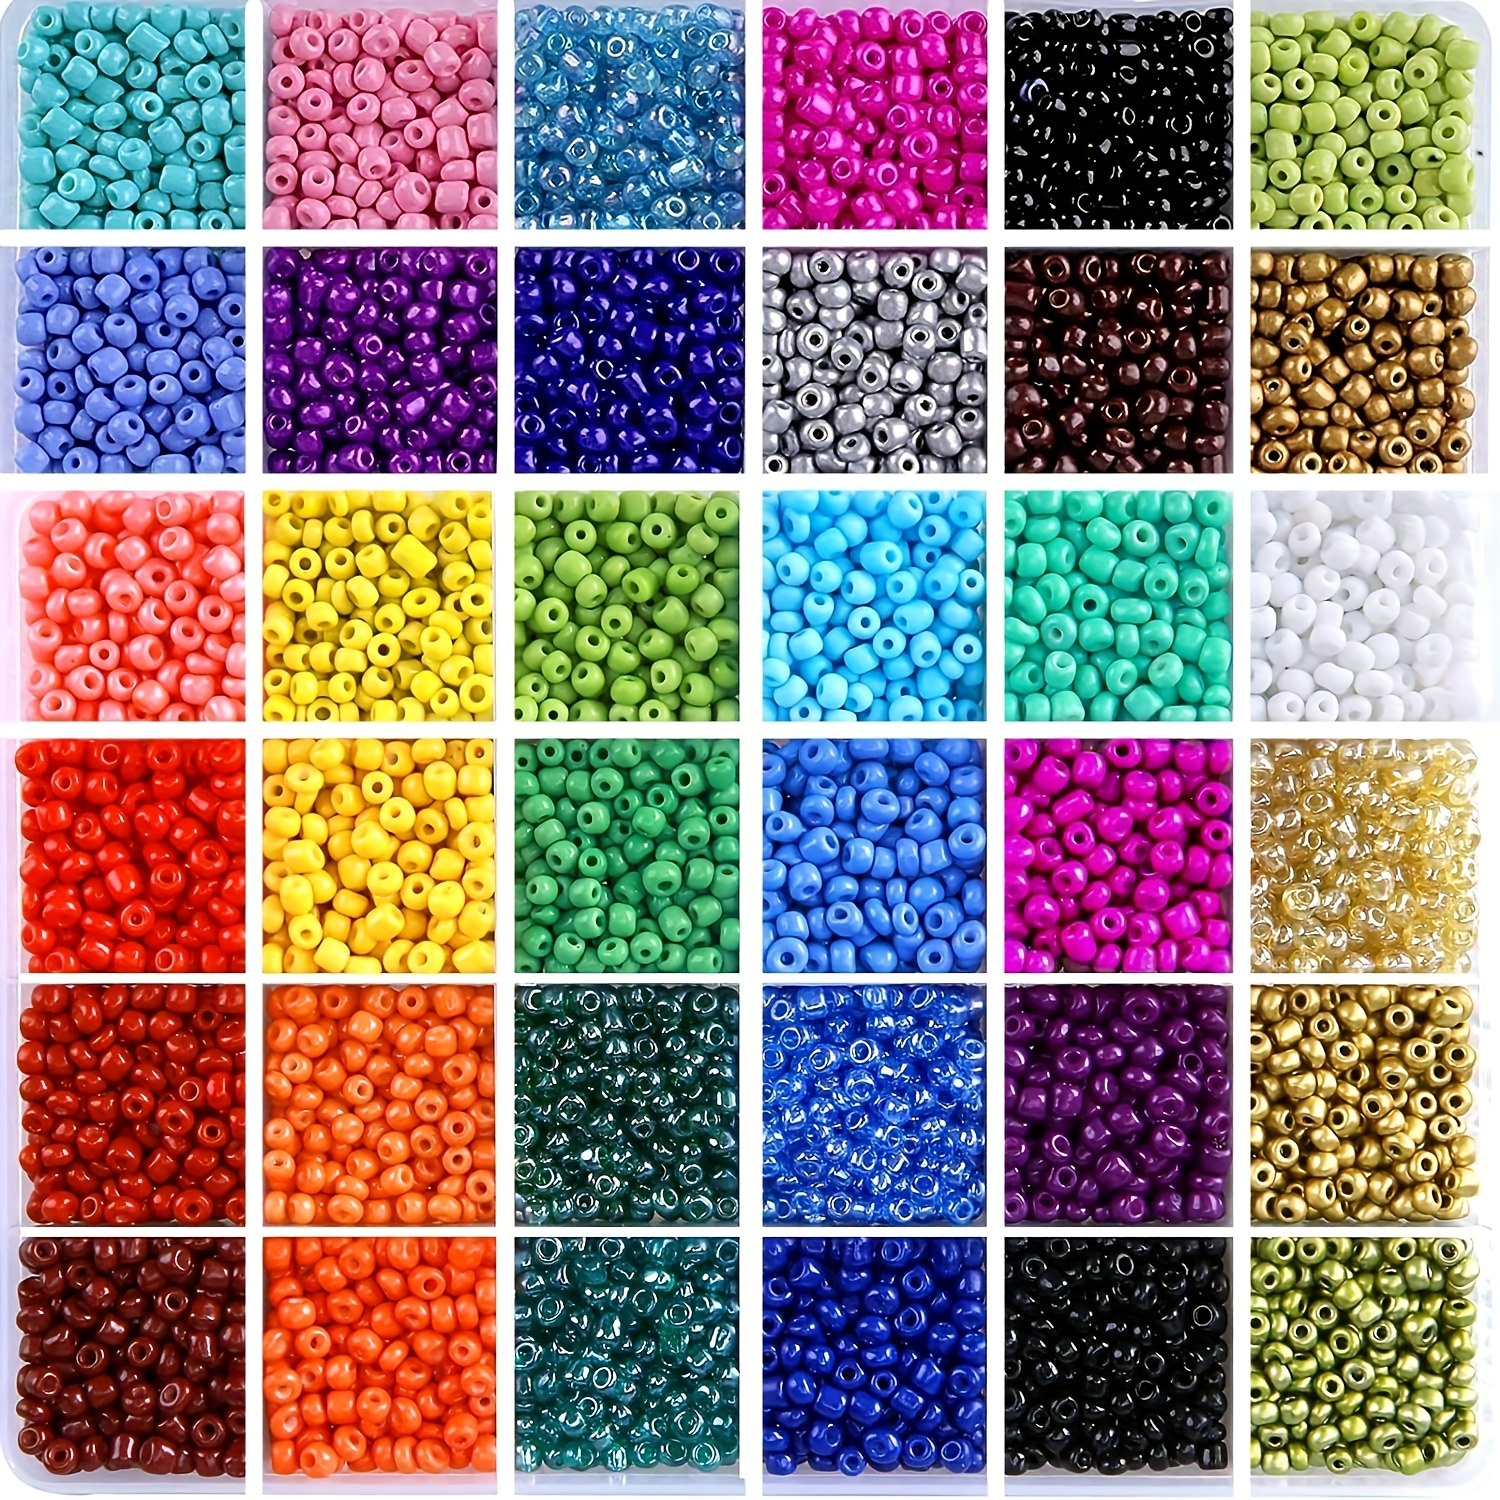 

5000pcs 3/4mm Glass Seed Beads For Jewelry Making Mixed Color Beaded Colorful Neon Diy Bracelet Earrings Necklace Crafts Supplies